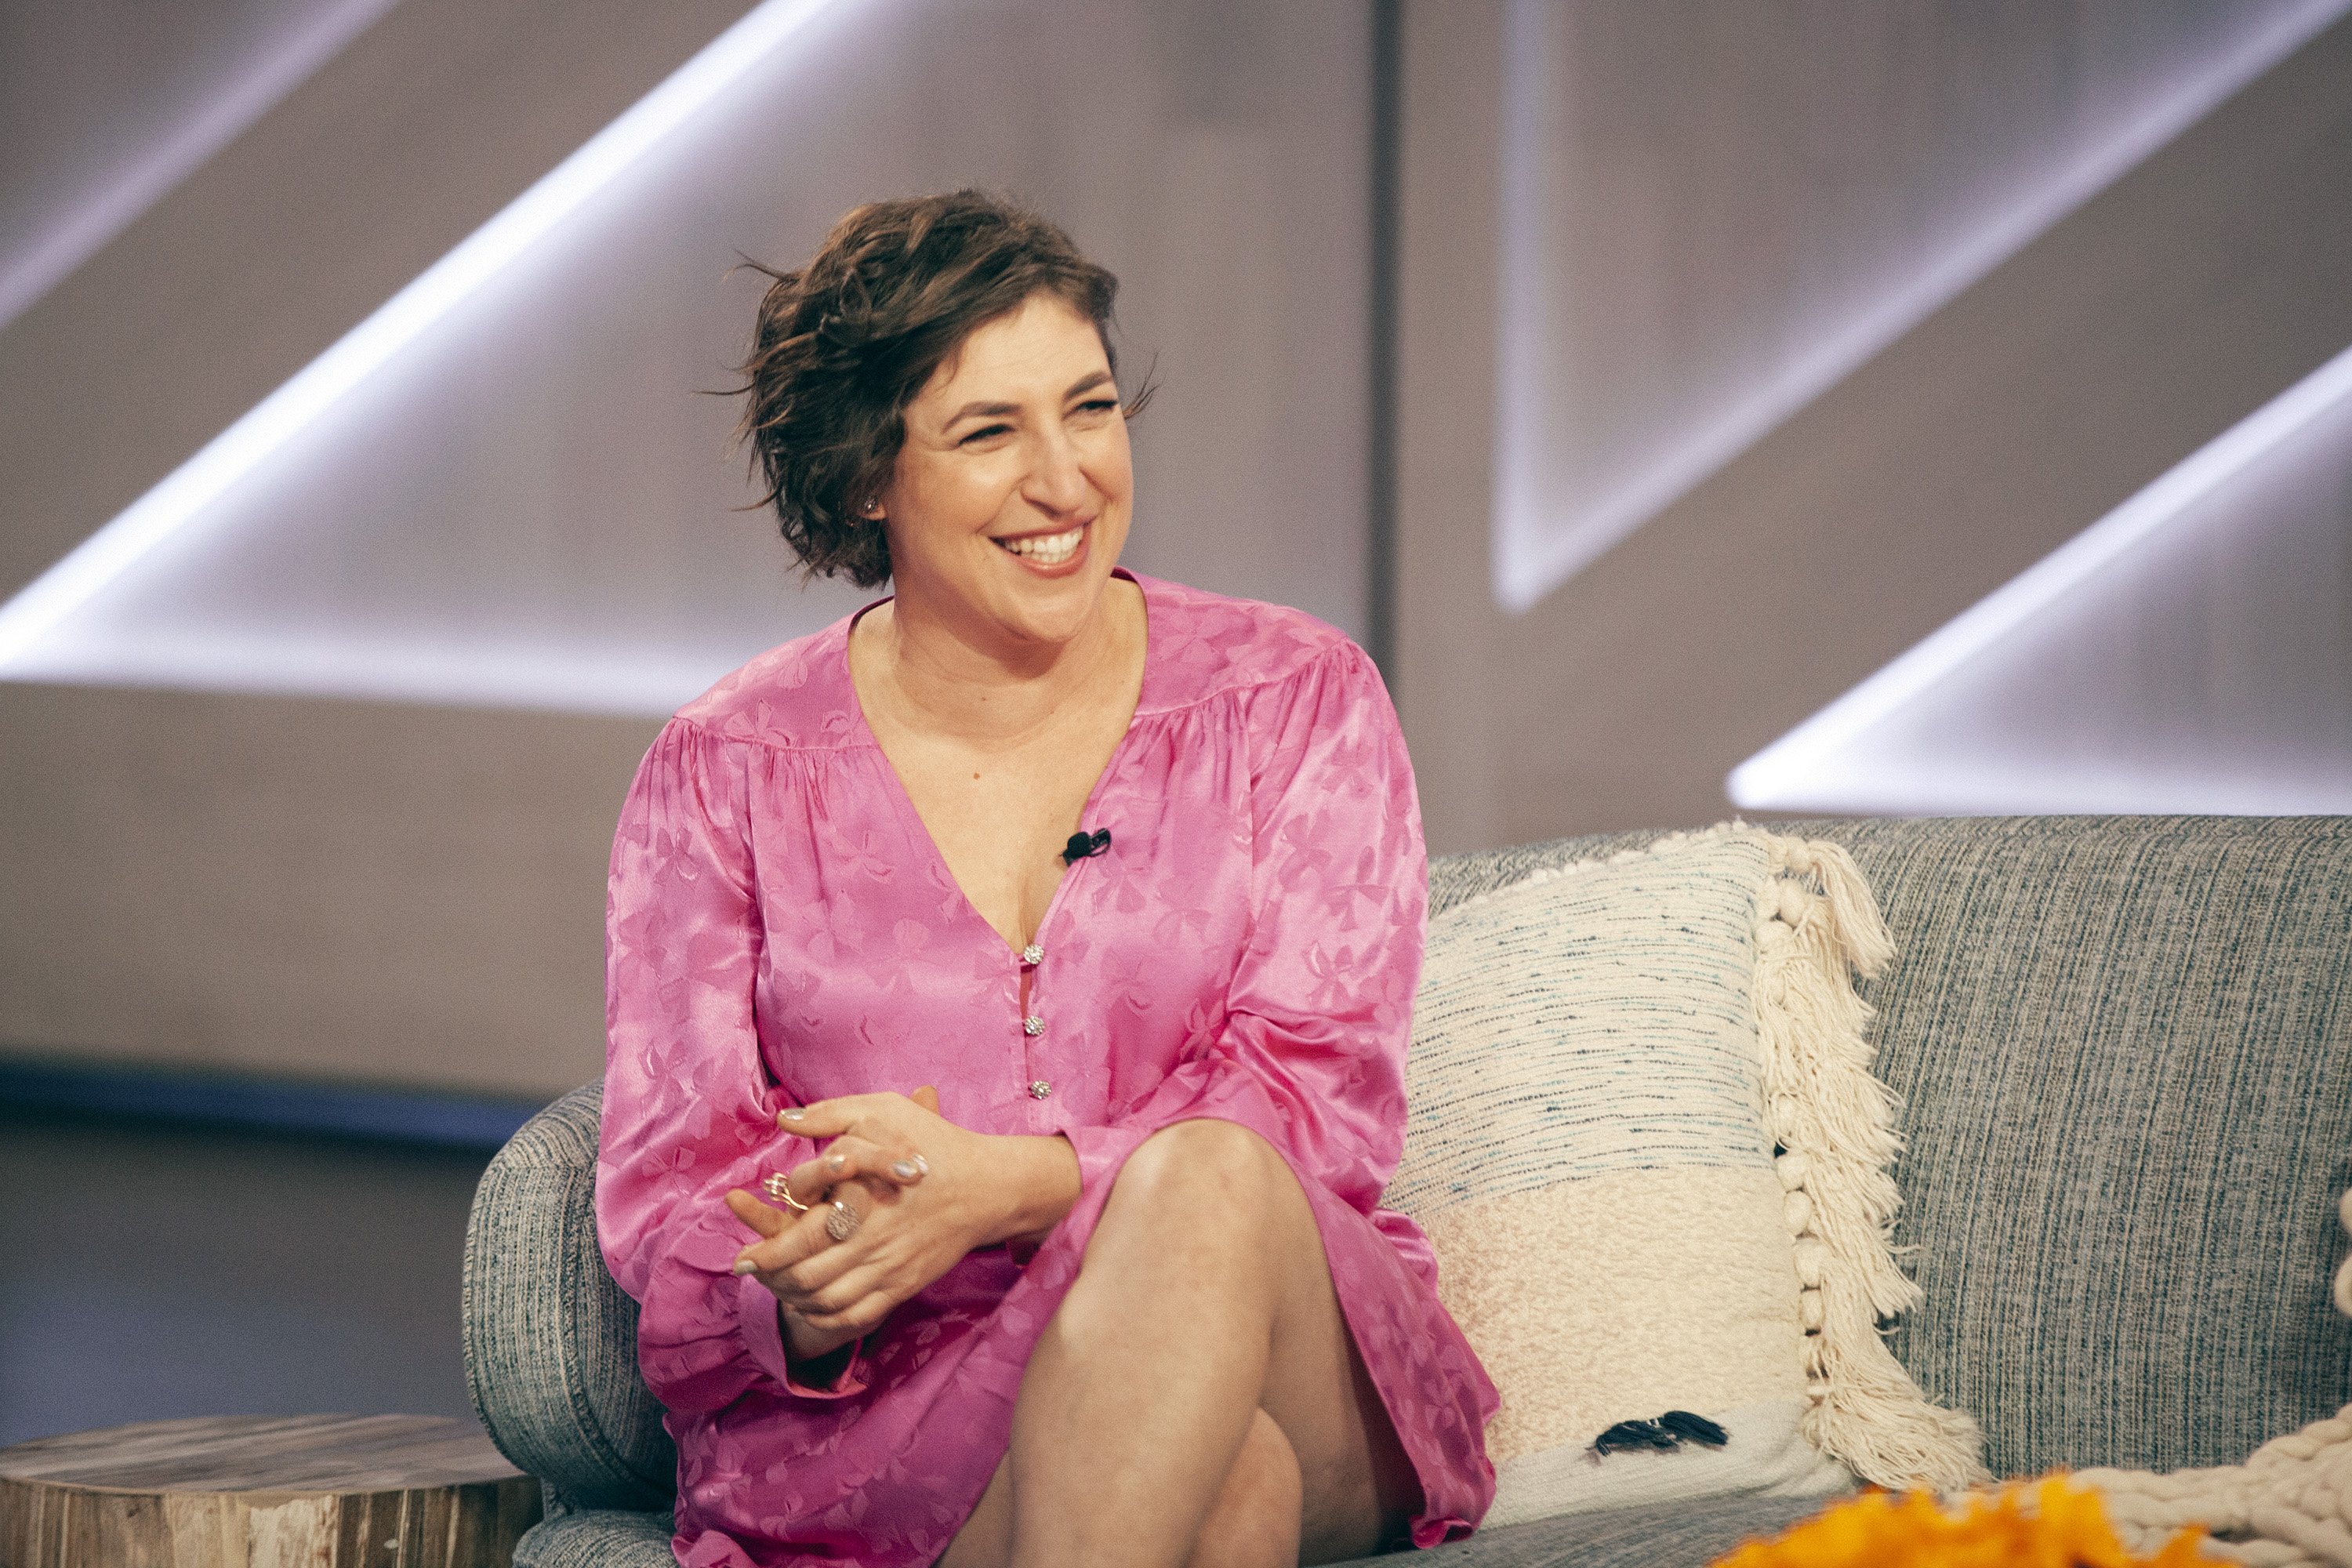 Mayim Biallik during her appearance on "The Kelly Clarkson Show" in January 2021. | Photo: Getty Images